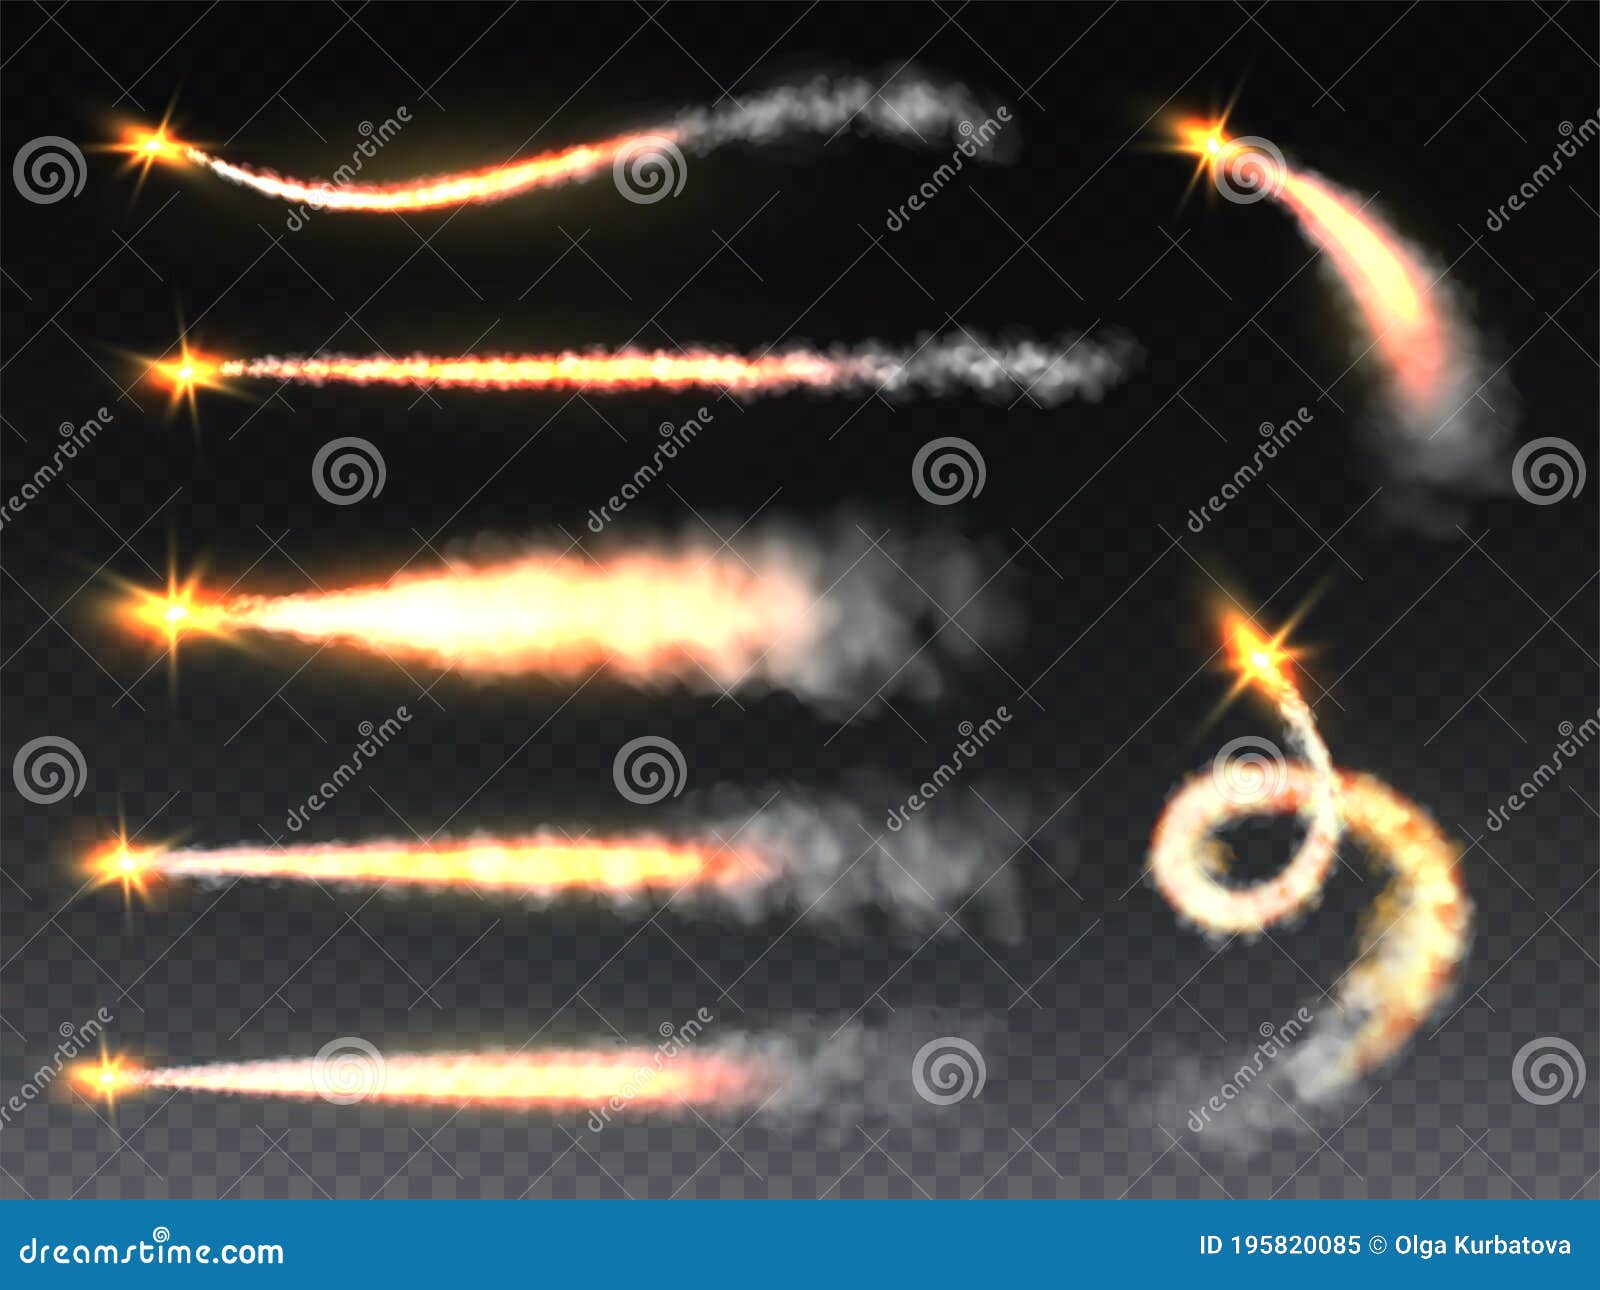 rocket smoke. trailing fume with flame jets, fiery foggy trails jet airplane. missile, shuttle or spaceship contrails